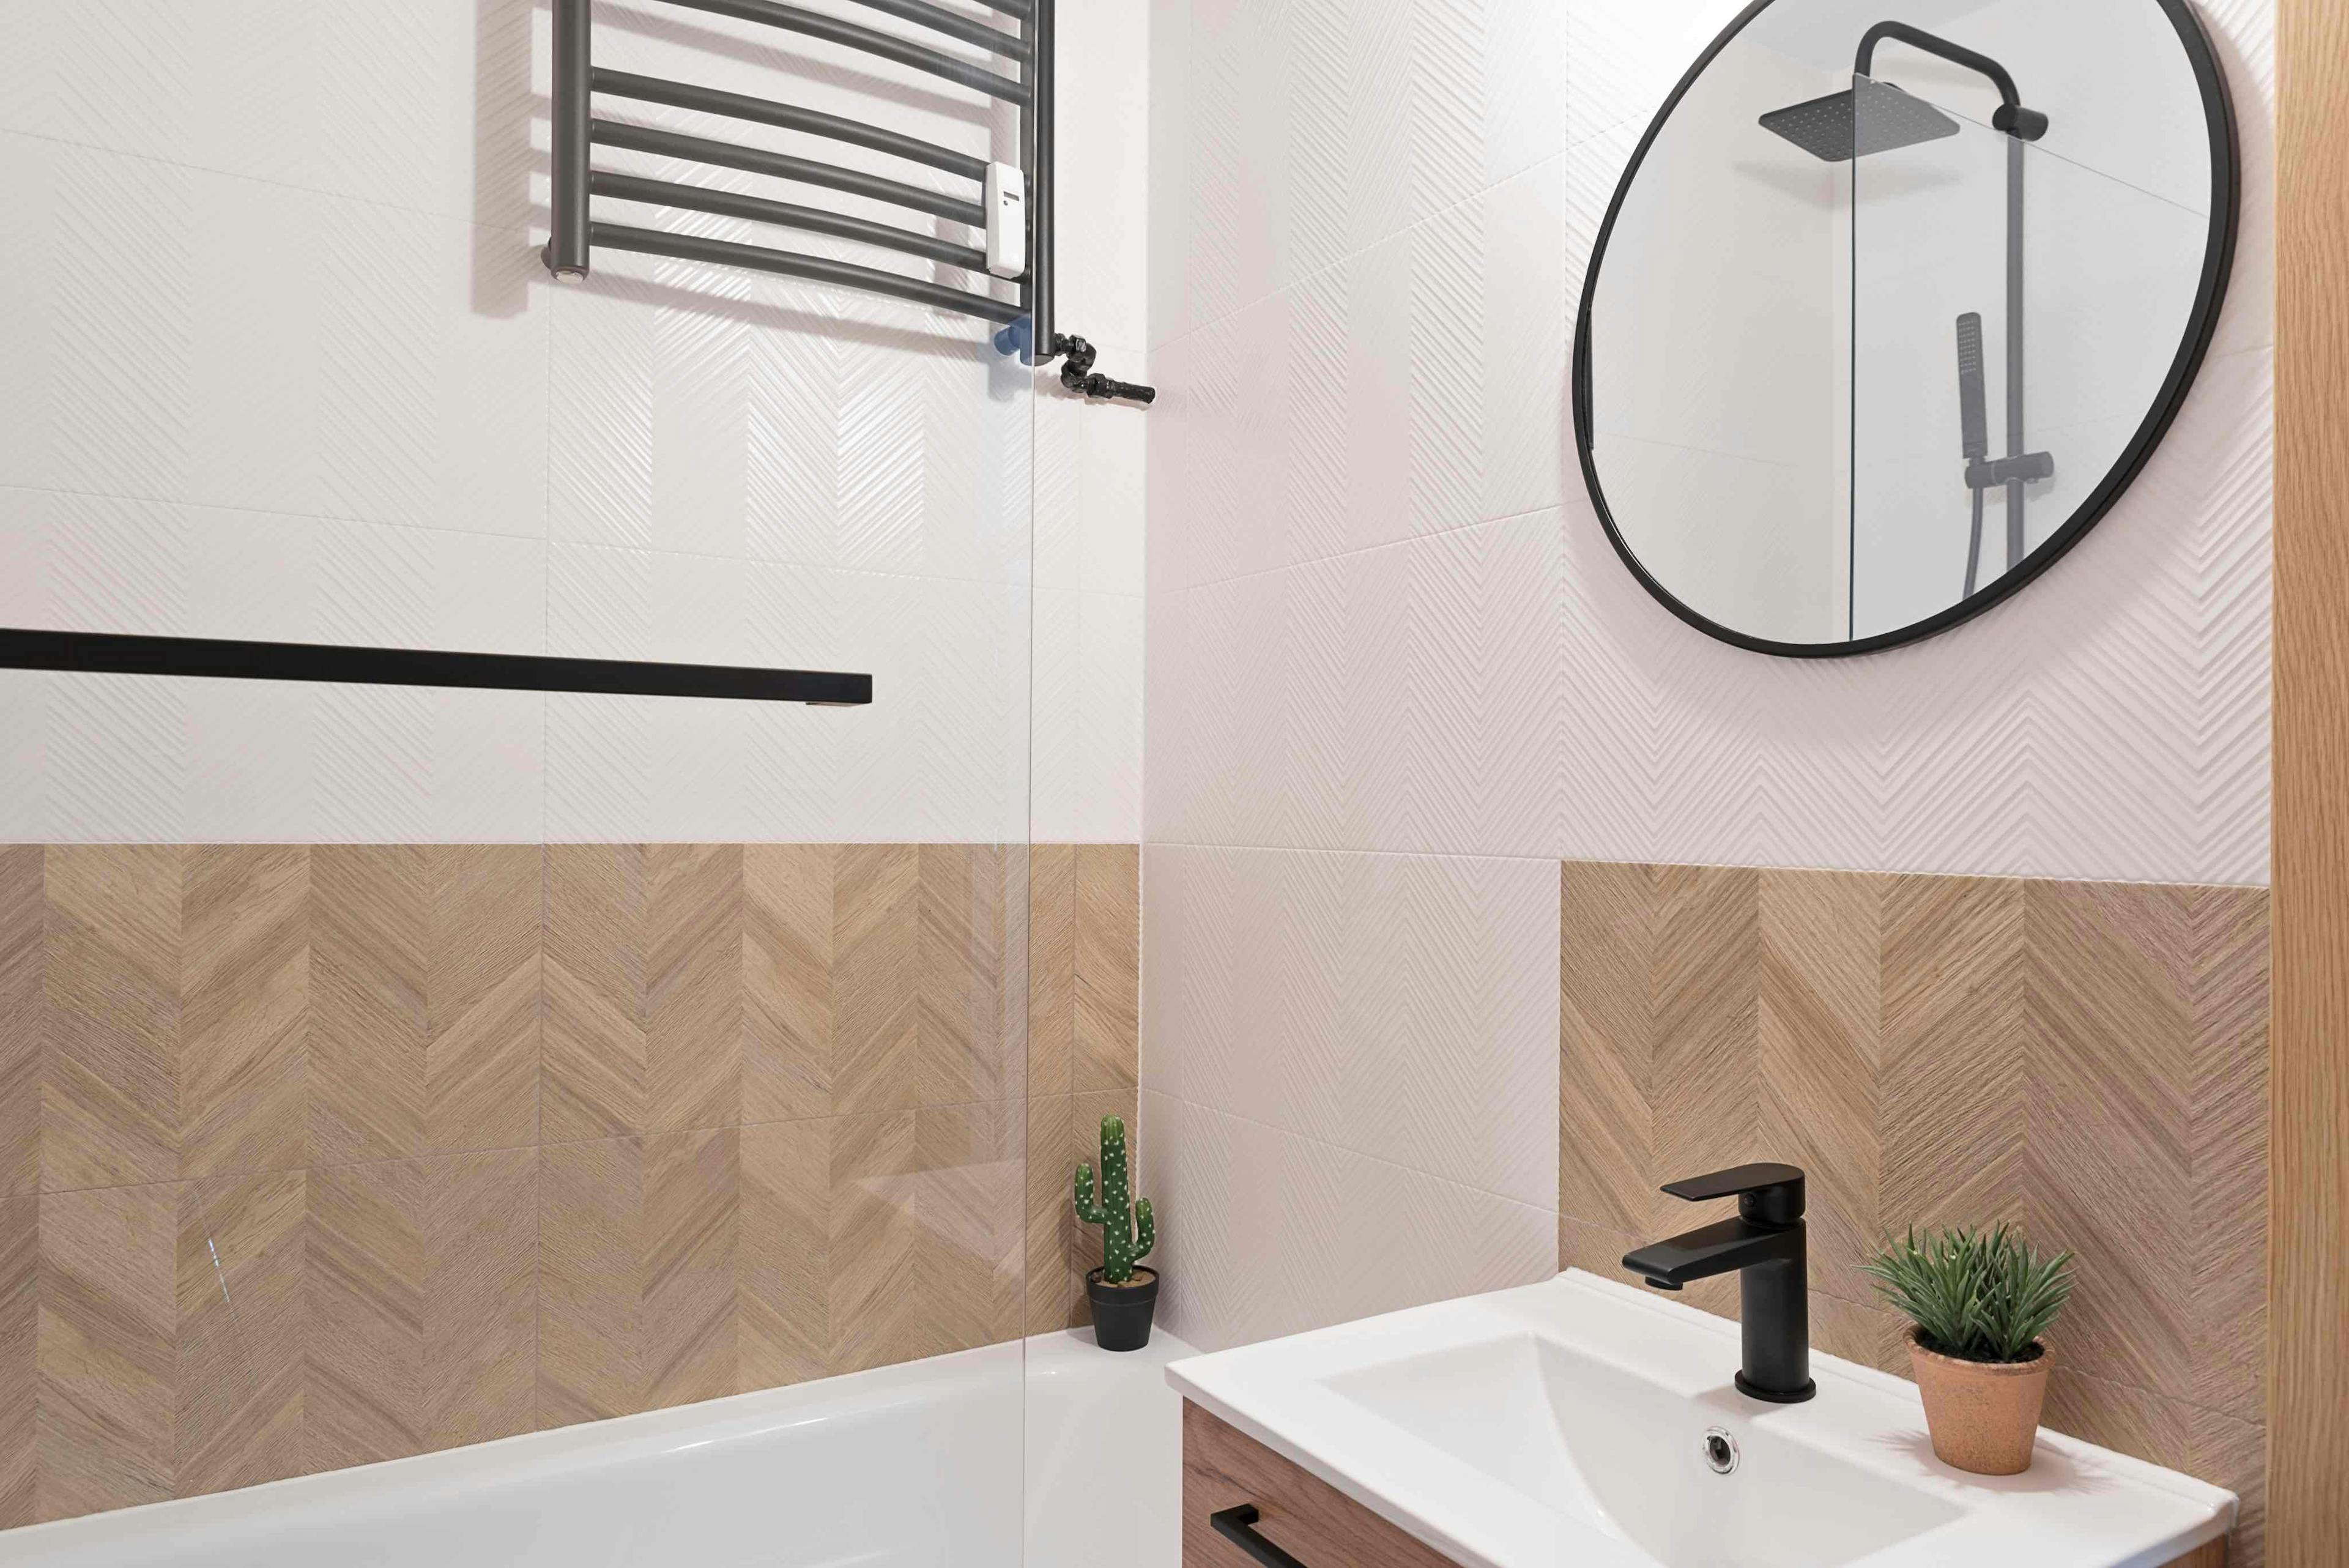 Get Started on Your Calgary Bathroom Renovation Today